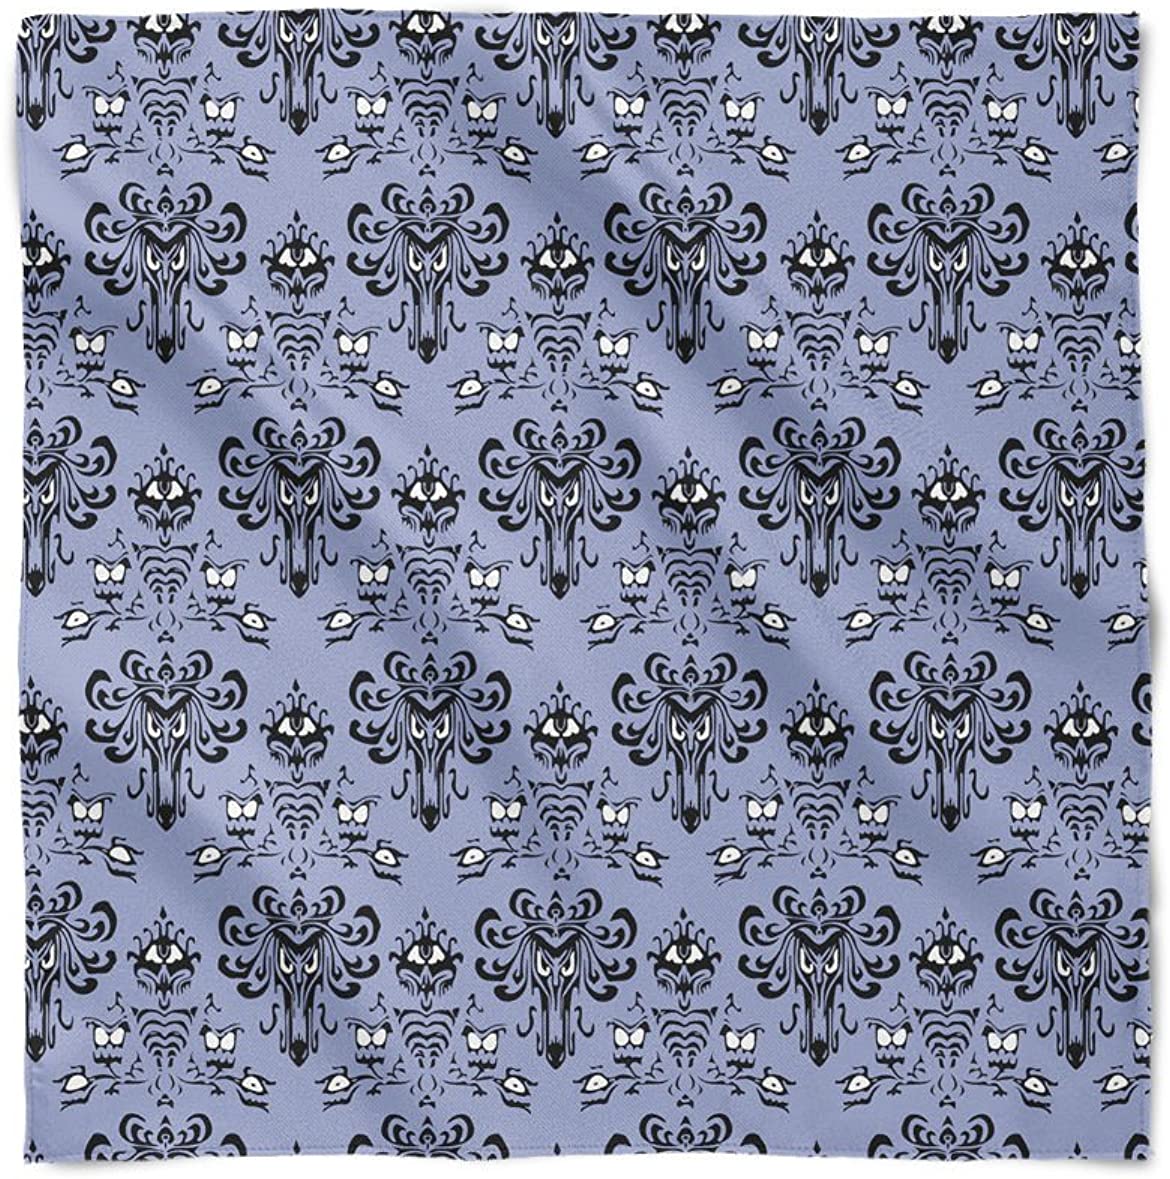 Haunted Mansion Wallpaper Satin Style Scarf At Amazon Women S